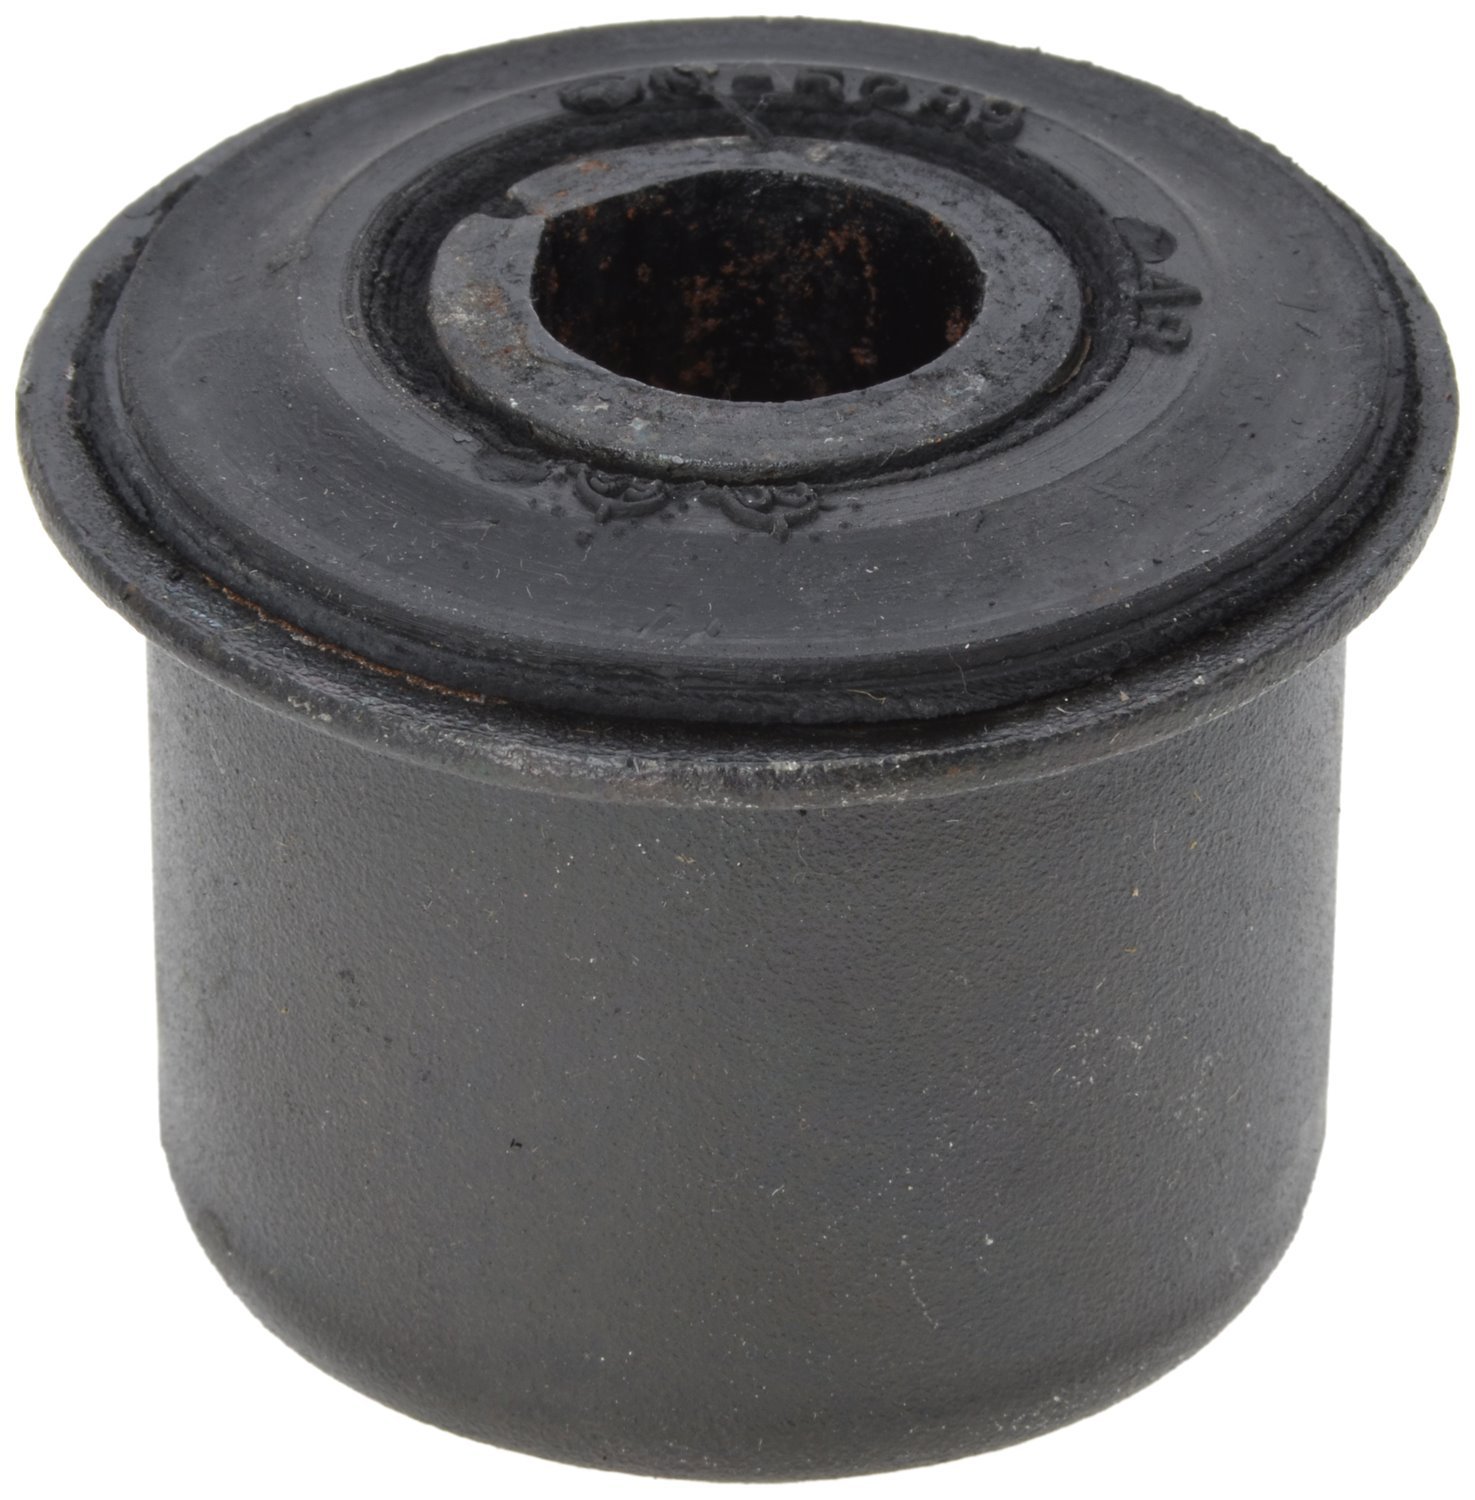 JBU805 Axle Pivot Bushing Fits Select Ford Models, Position: Left/Driver or Right/Passenger, Front